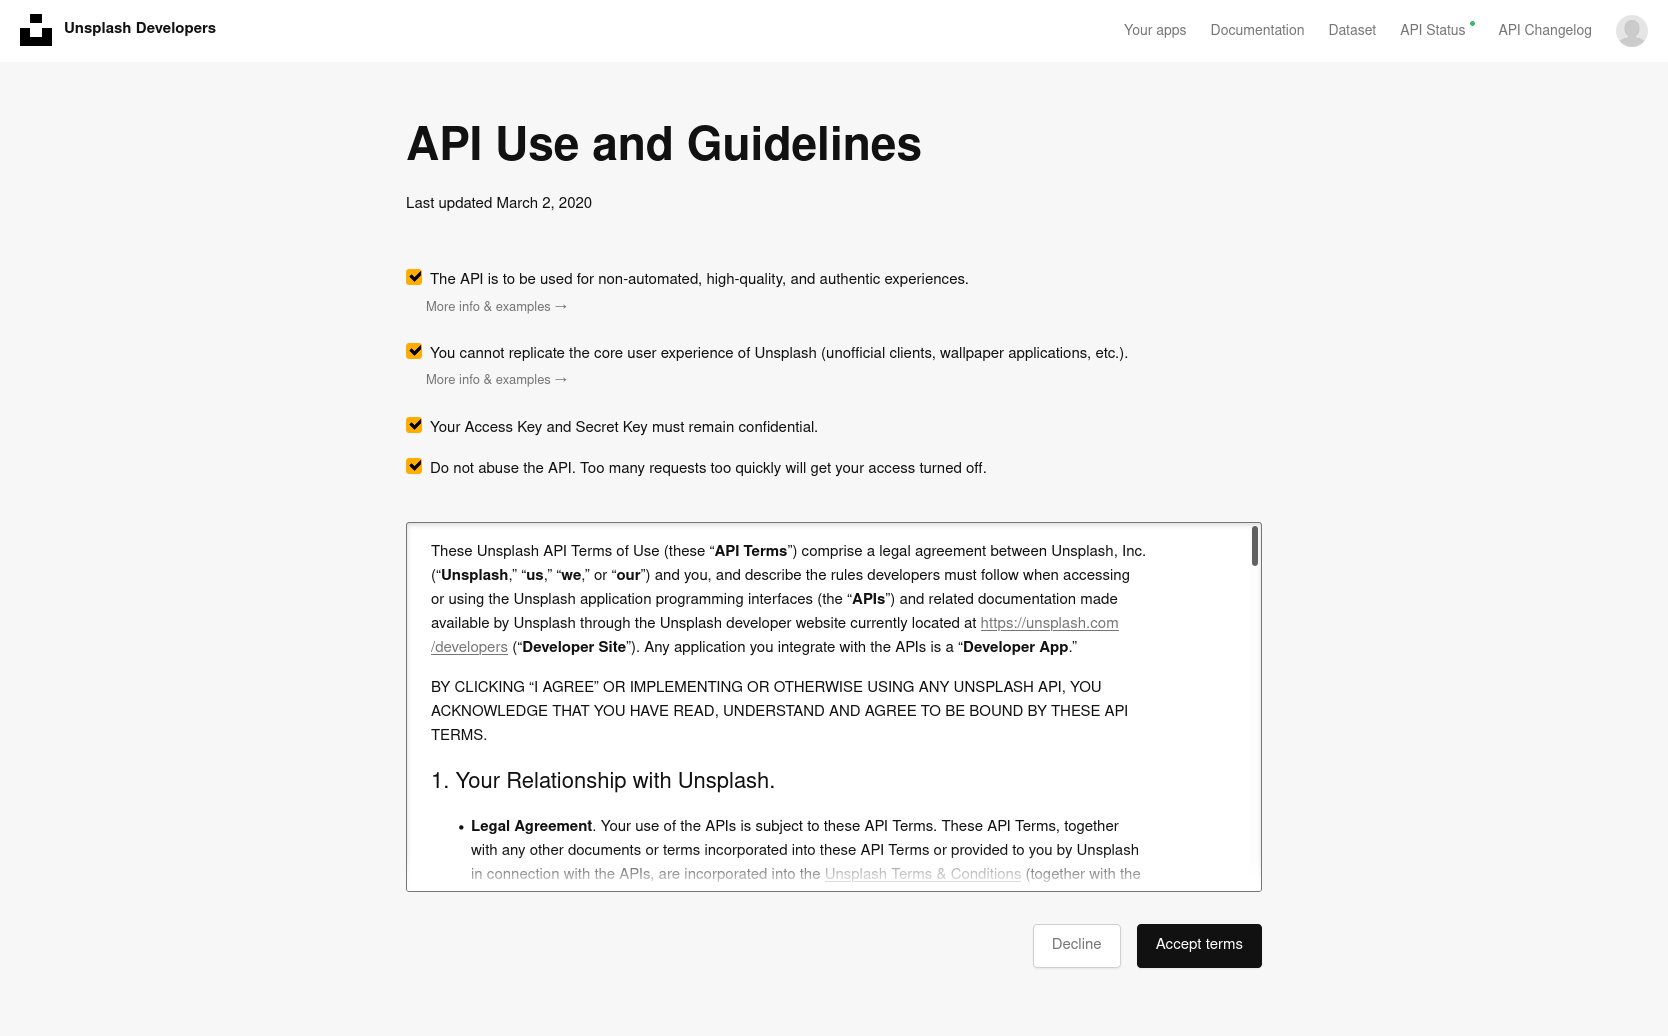 The guidelines and terms box within Unsplash’s developer console.